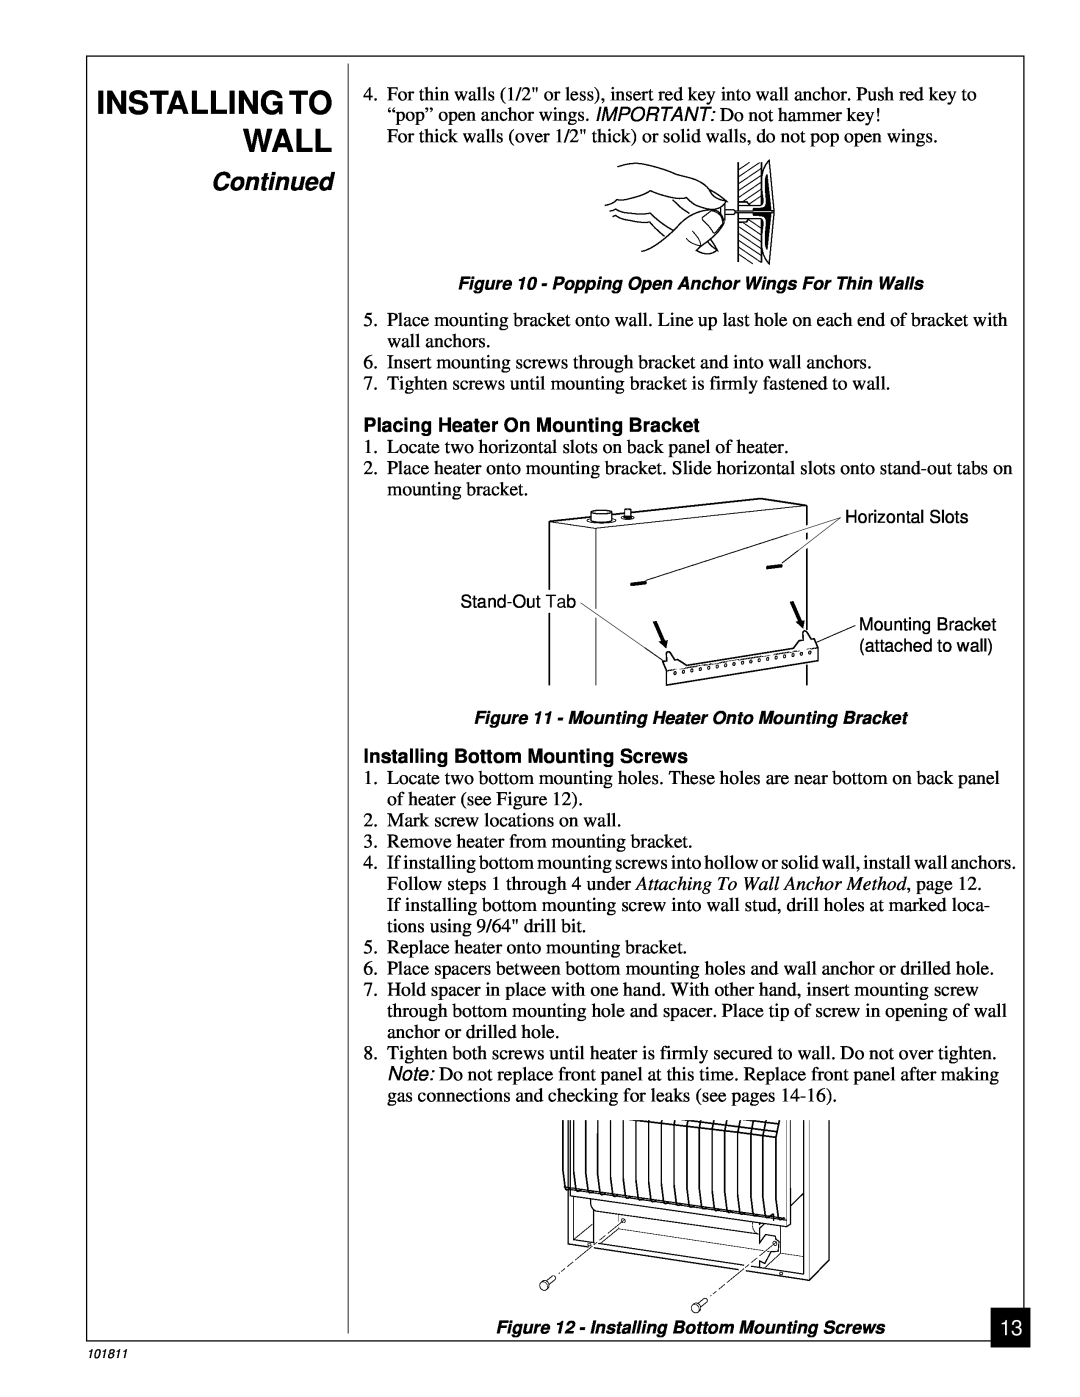 Desa 101811-01C.pdf Installing To Wall, Continued, Placing Heater On Mounting Bracket, Installing Bottom Mounting Screws 